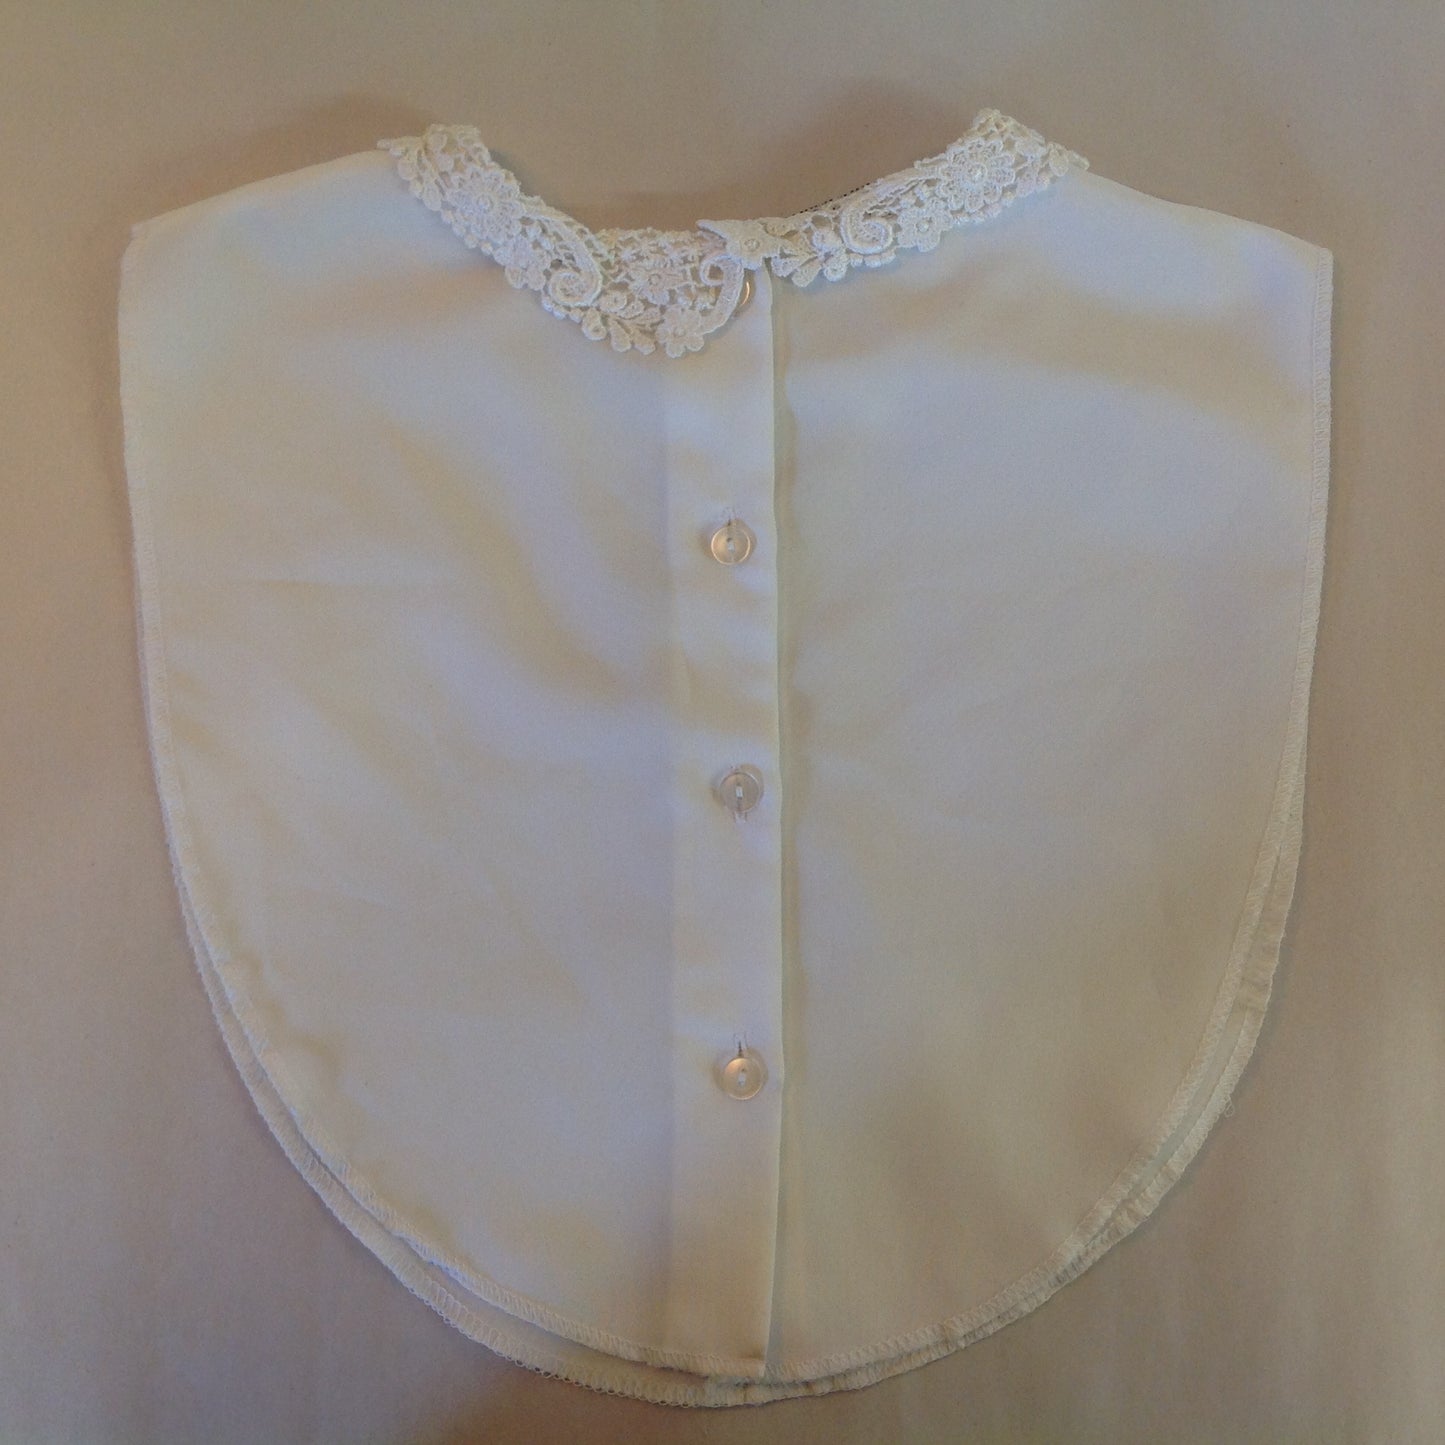 Vintage 1970's Specialty House Dickey Polyester Lace Collar Button-Up